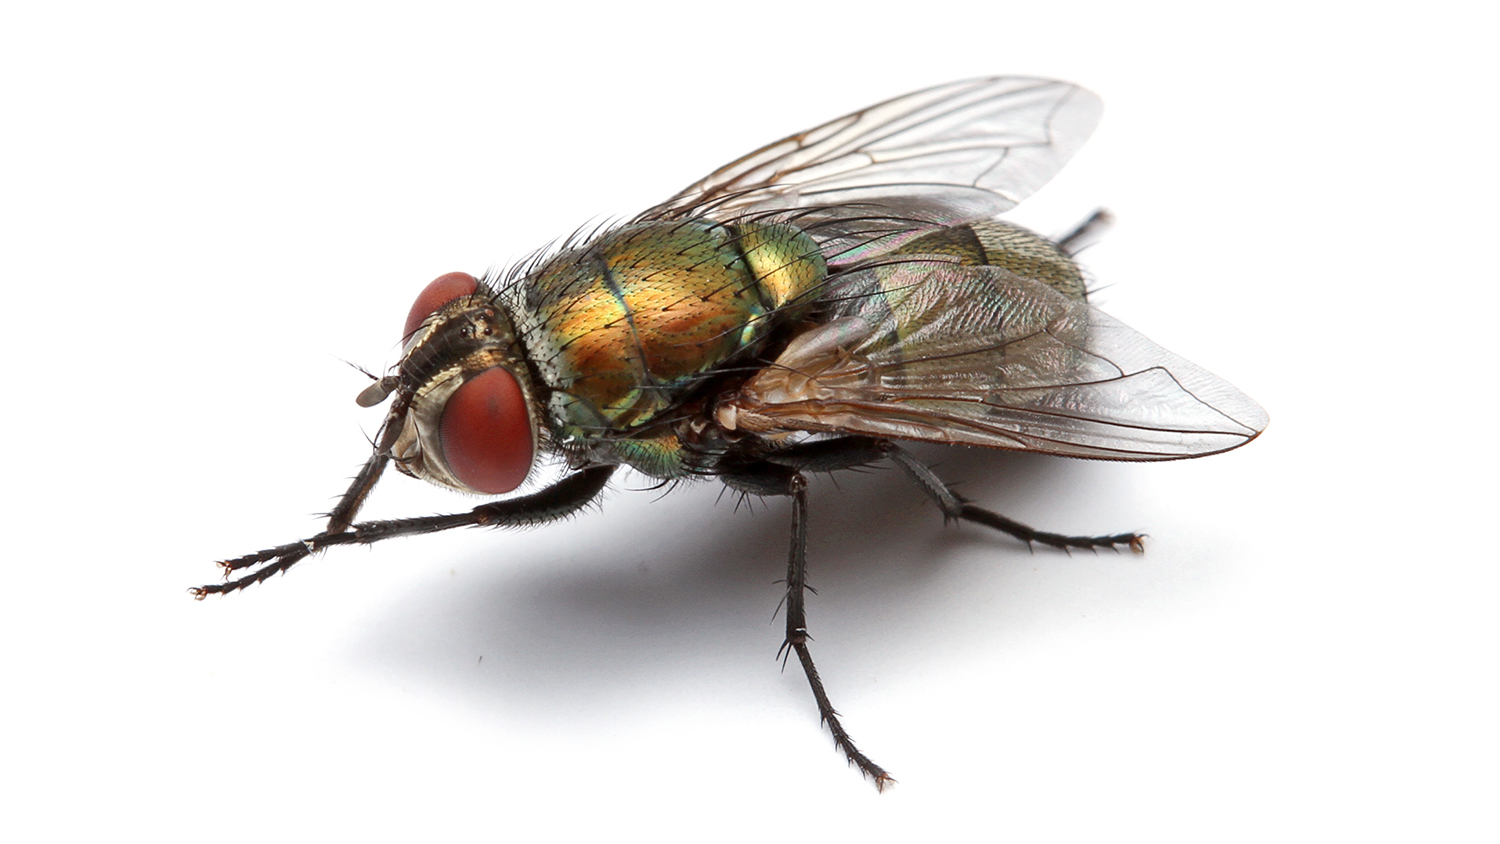 A female blowfly on a white background